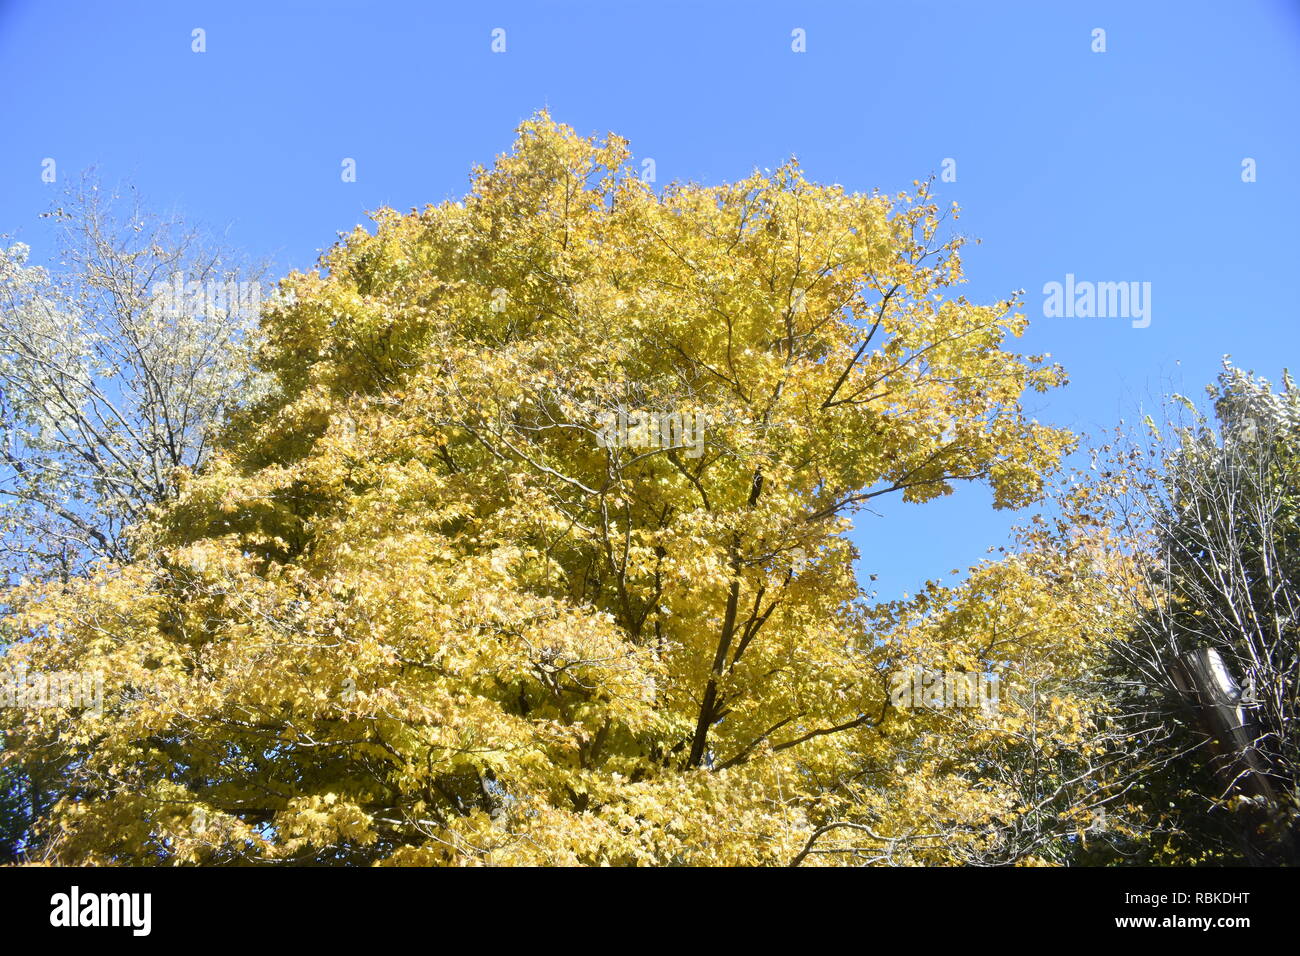 Beautiful yellow autumn maple tree leaves against a clear bright blue sky Stock Photo